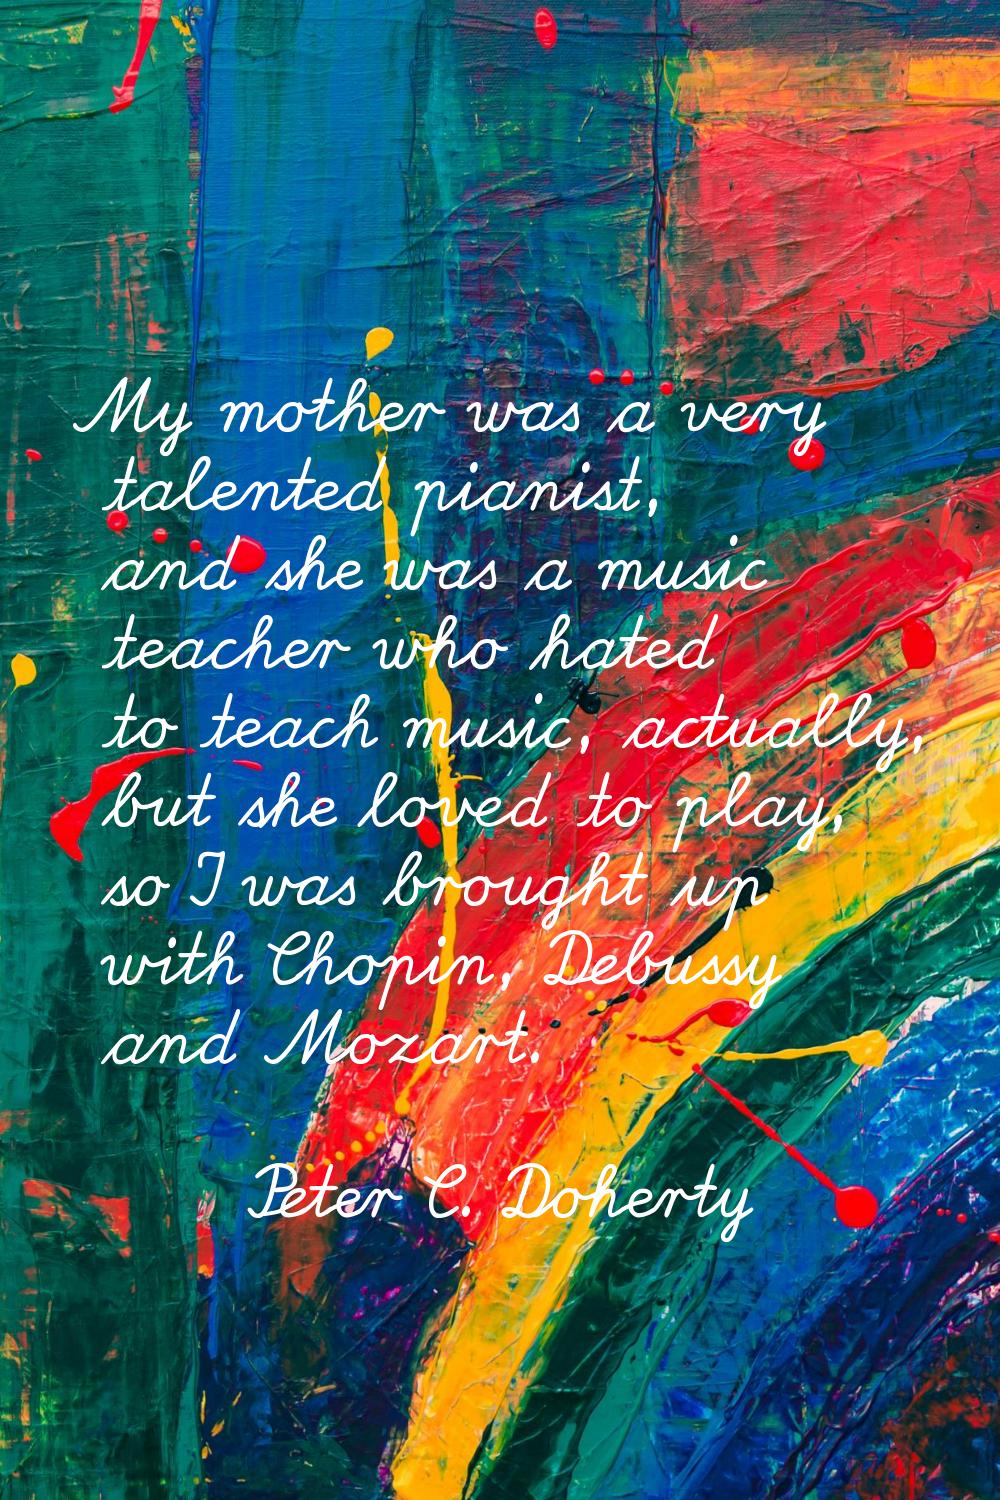 My mother was a very talented pianist, and she was a music teacher who hated to teach music, actual